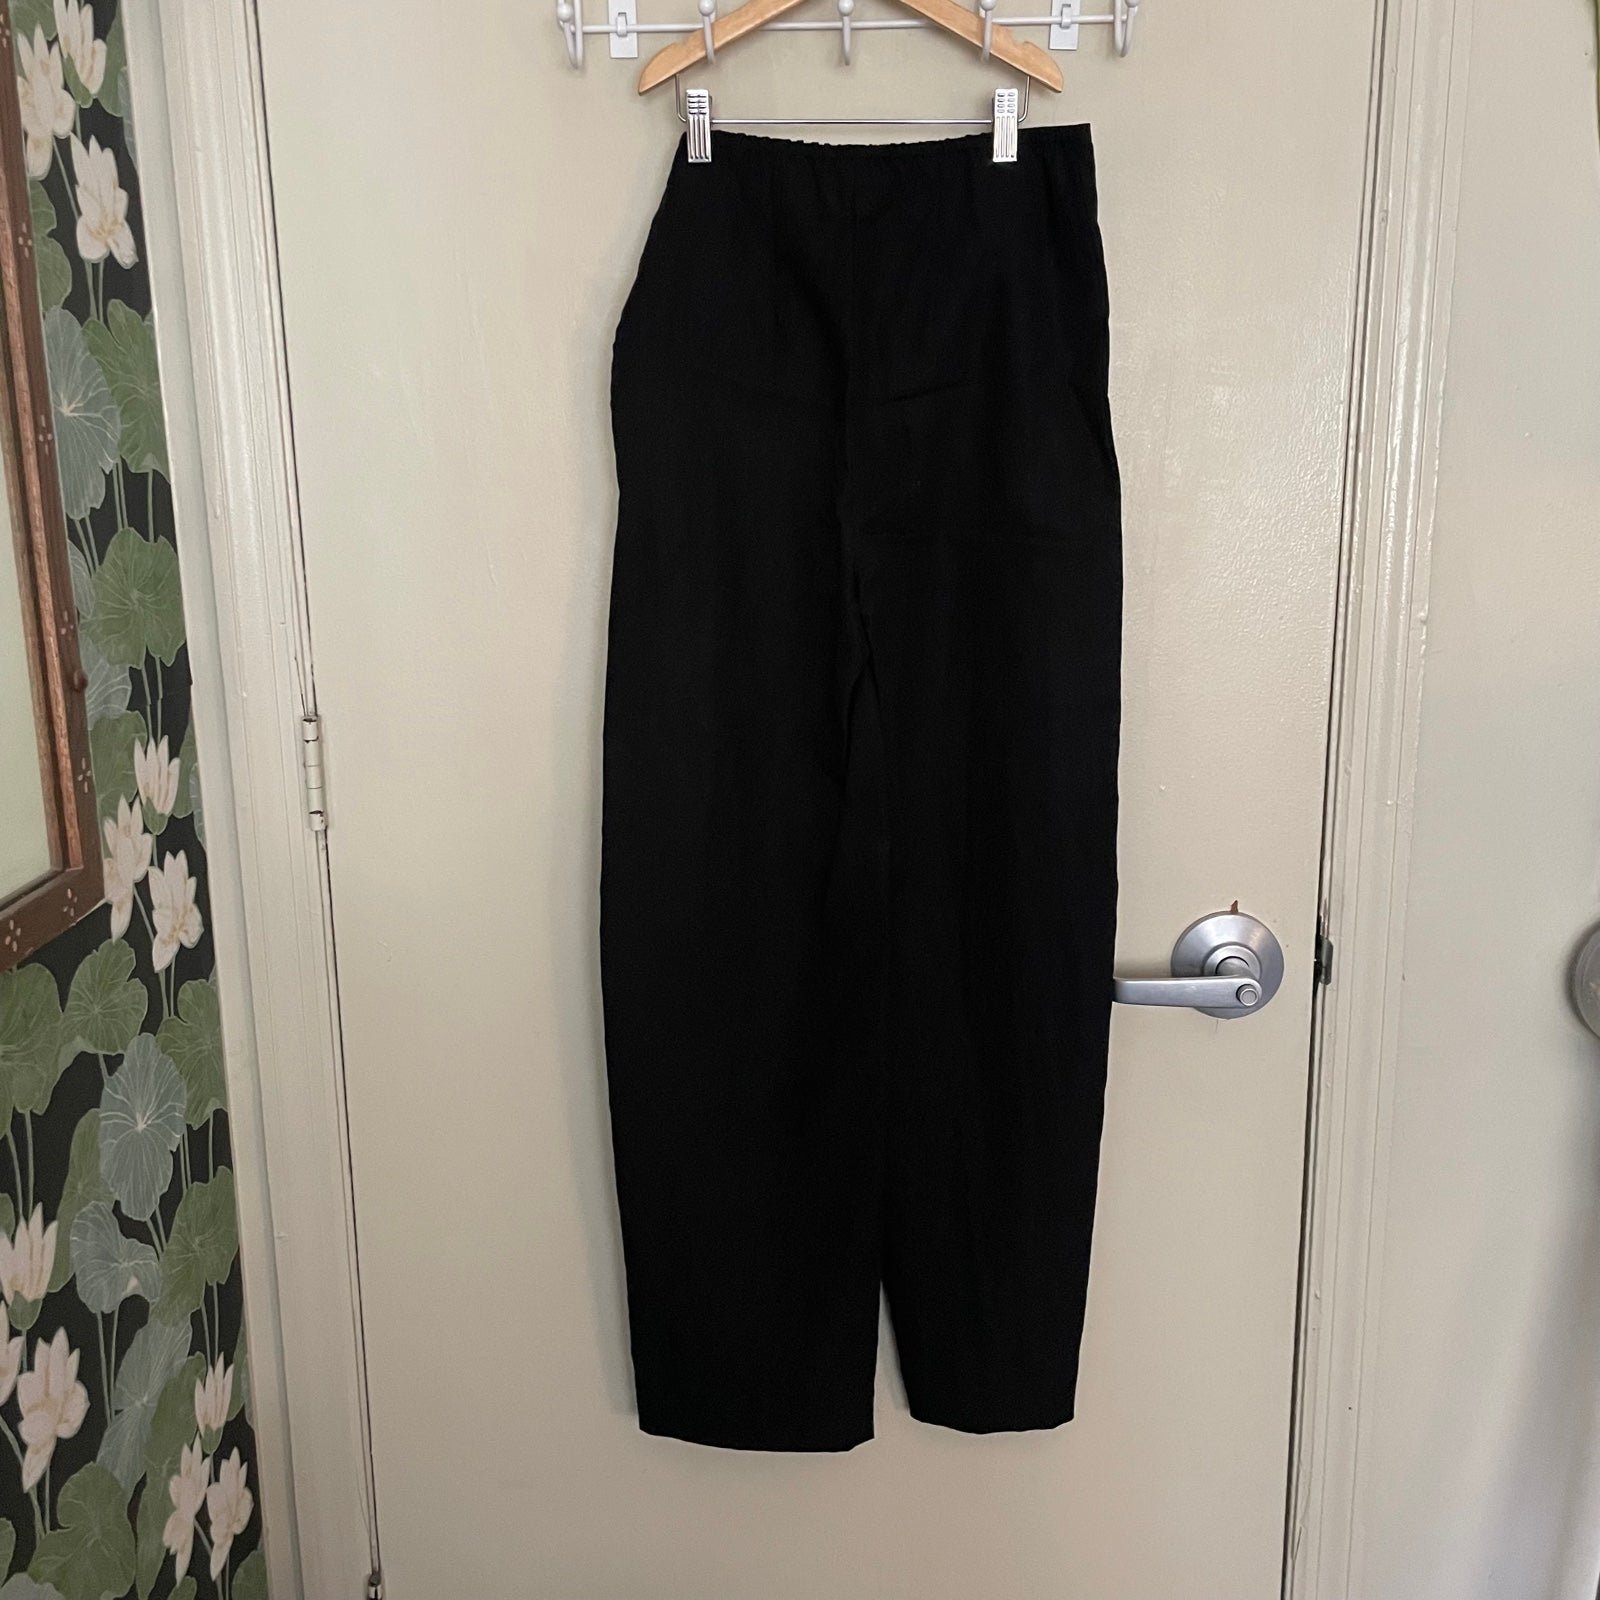 the Lowest price Vince tie front wide leg pants OSJ2fIgKG no tax